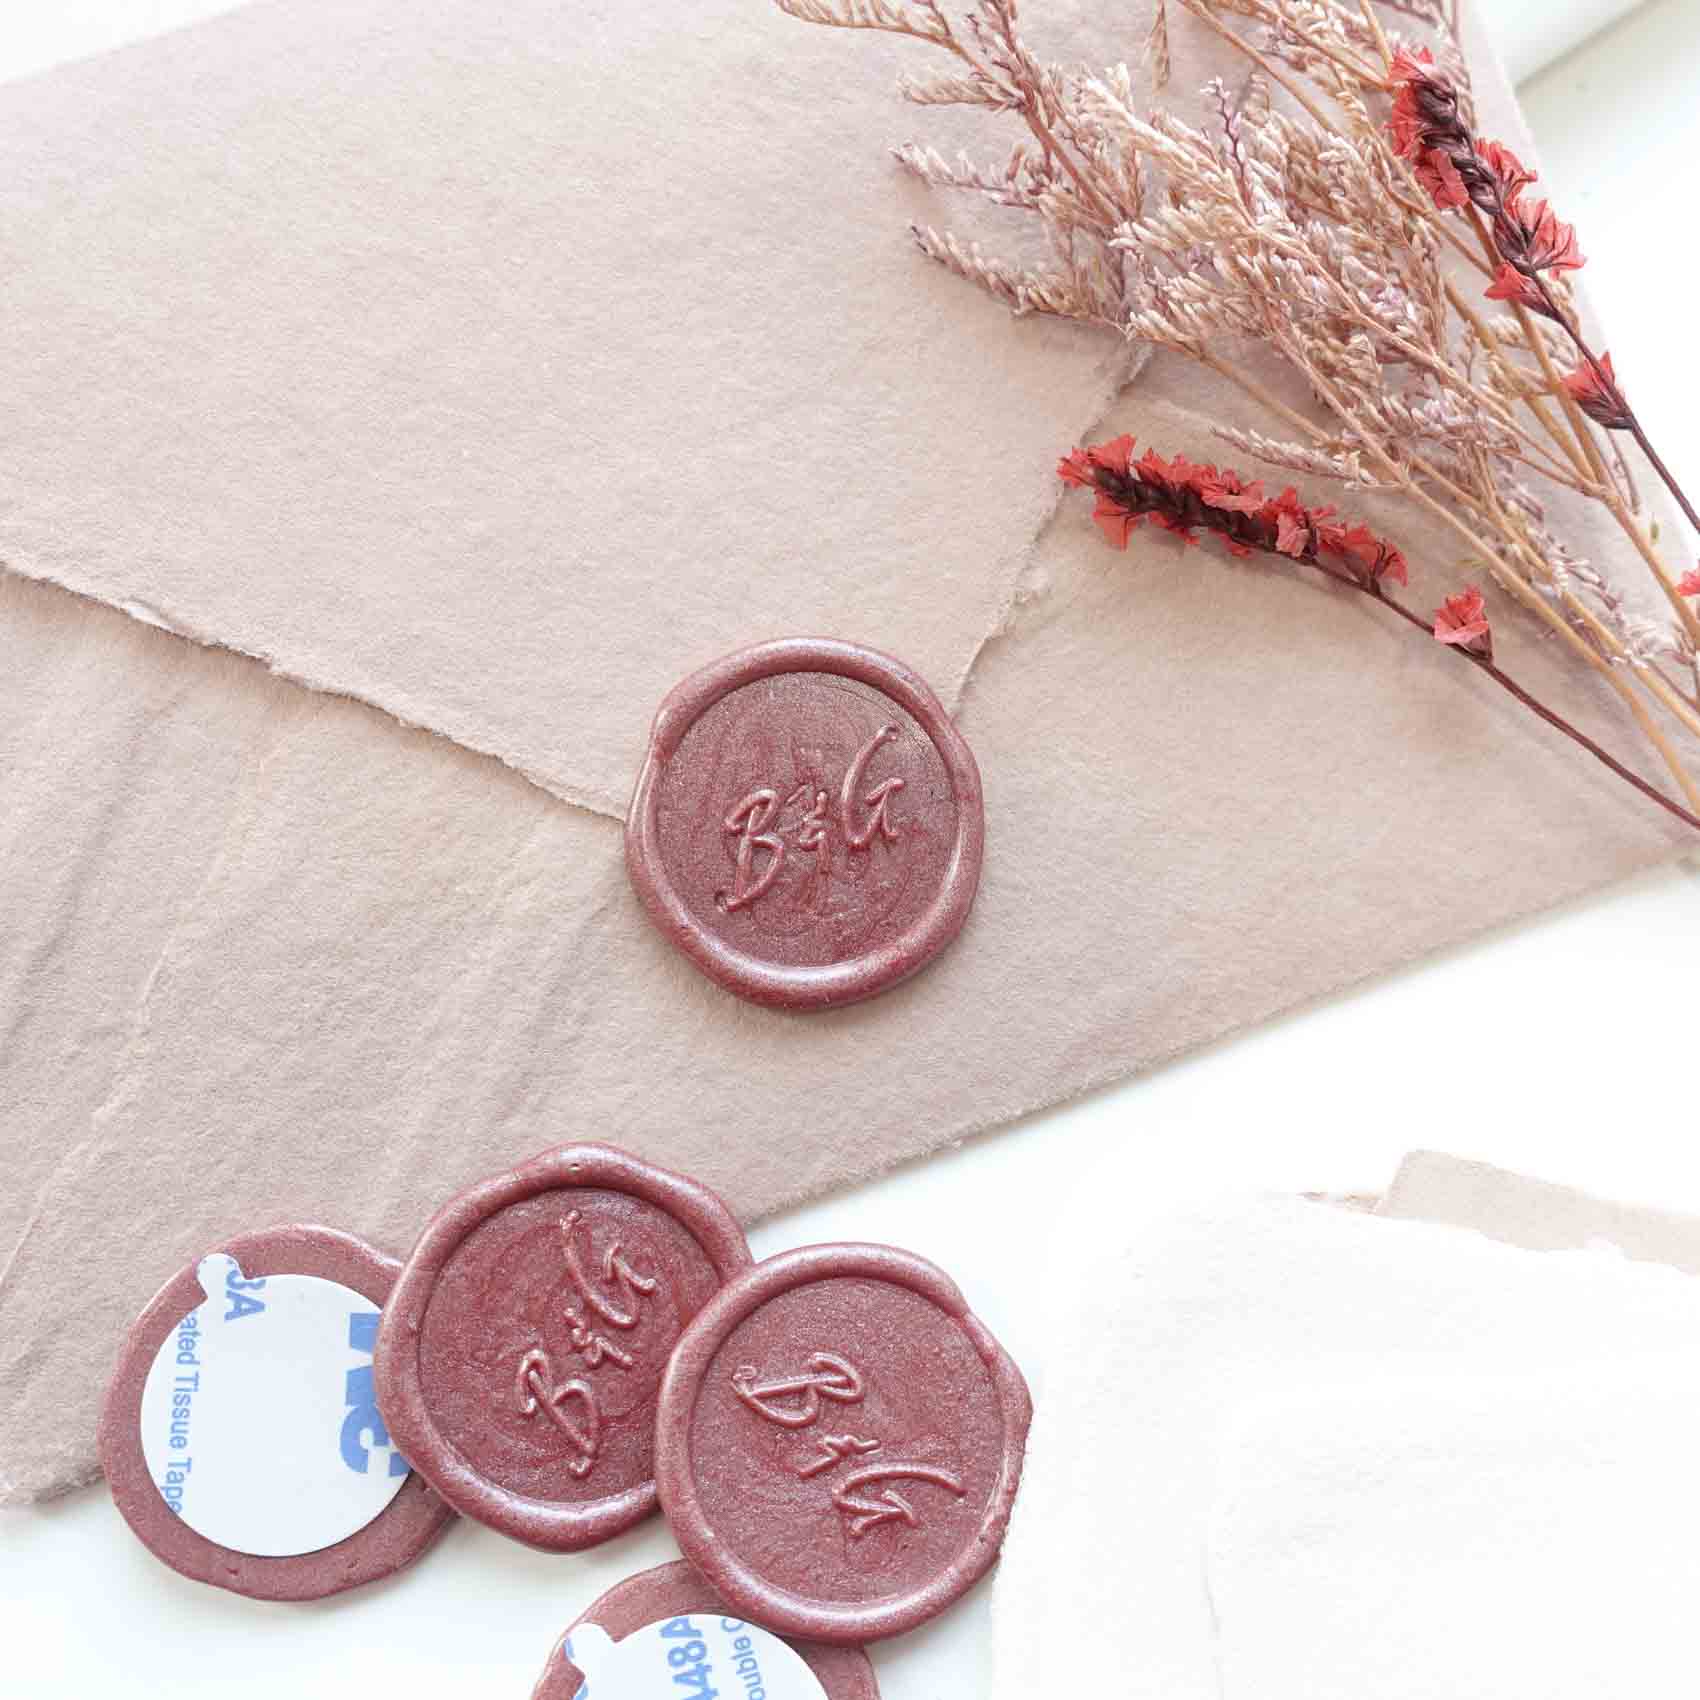 Antique rose sealing wax beads with wedding initials wax seal on envelope Australia